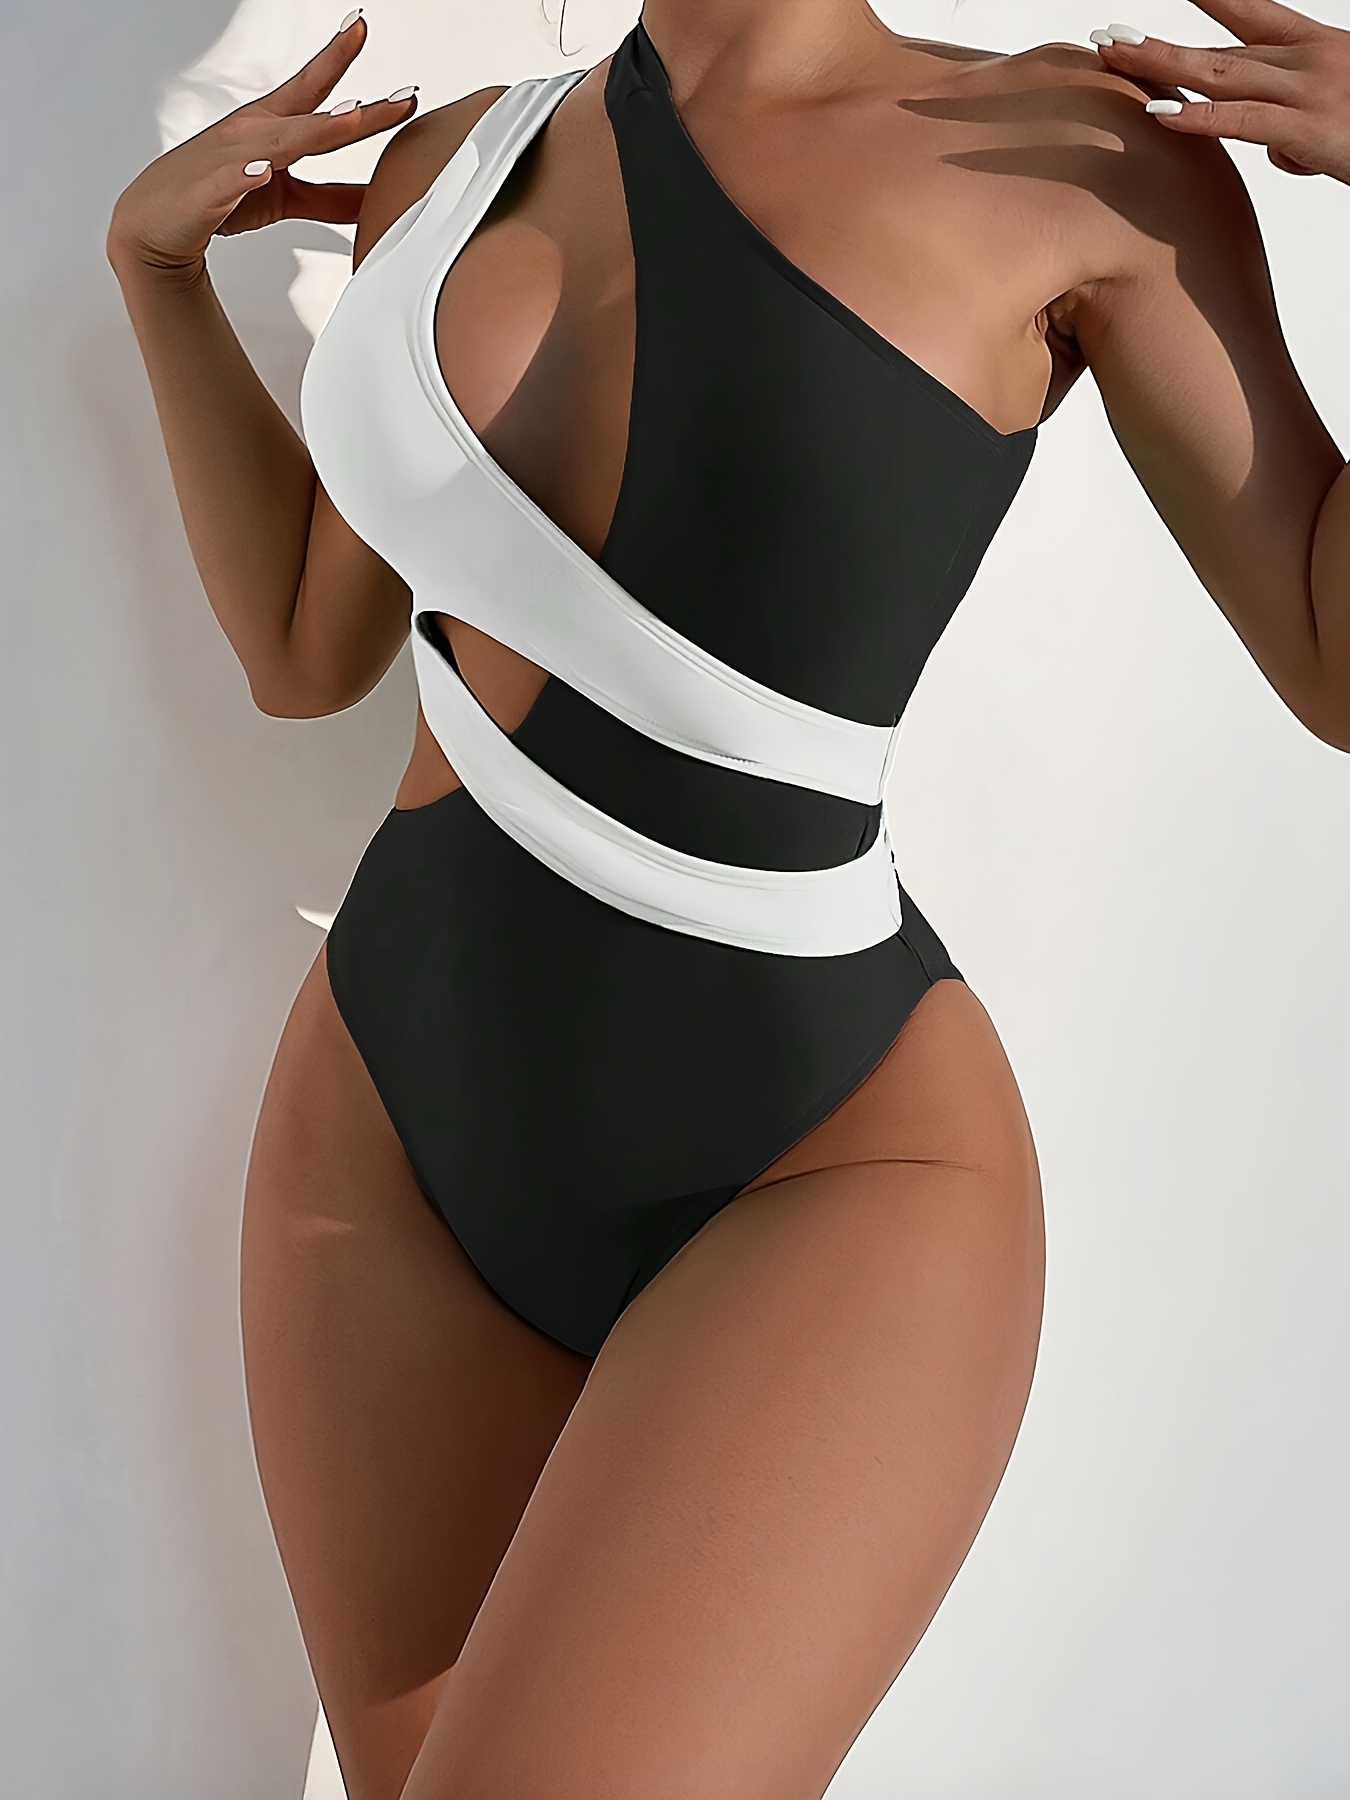 Plain Scoop Neck Black One Piece Swimsuit, Stretchy High Cut Stylish  Bathing Suit For Beach Pool, Women's Swimwear & Clothing